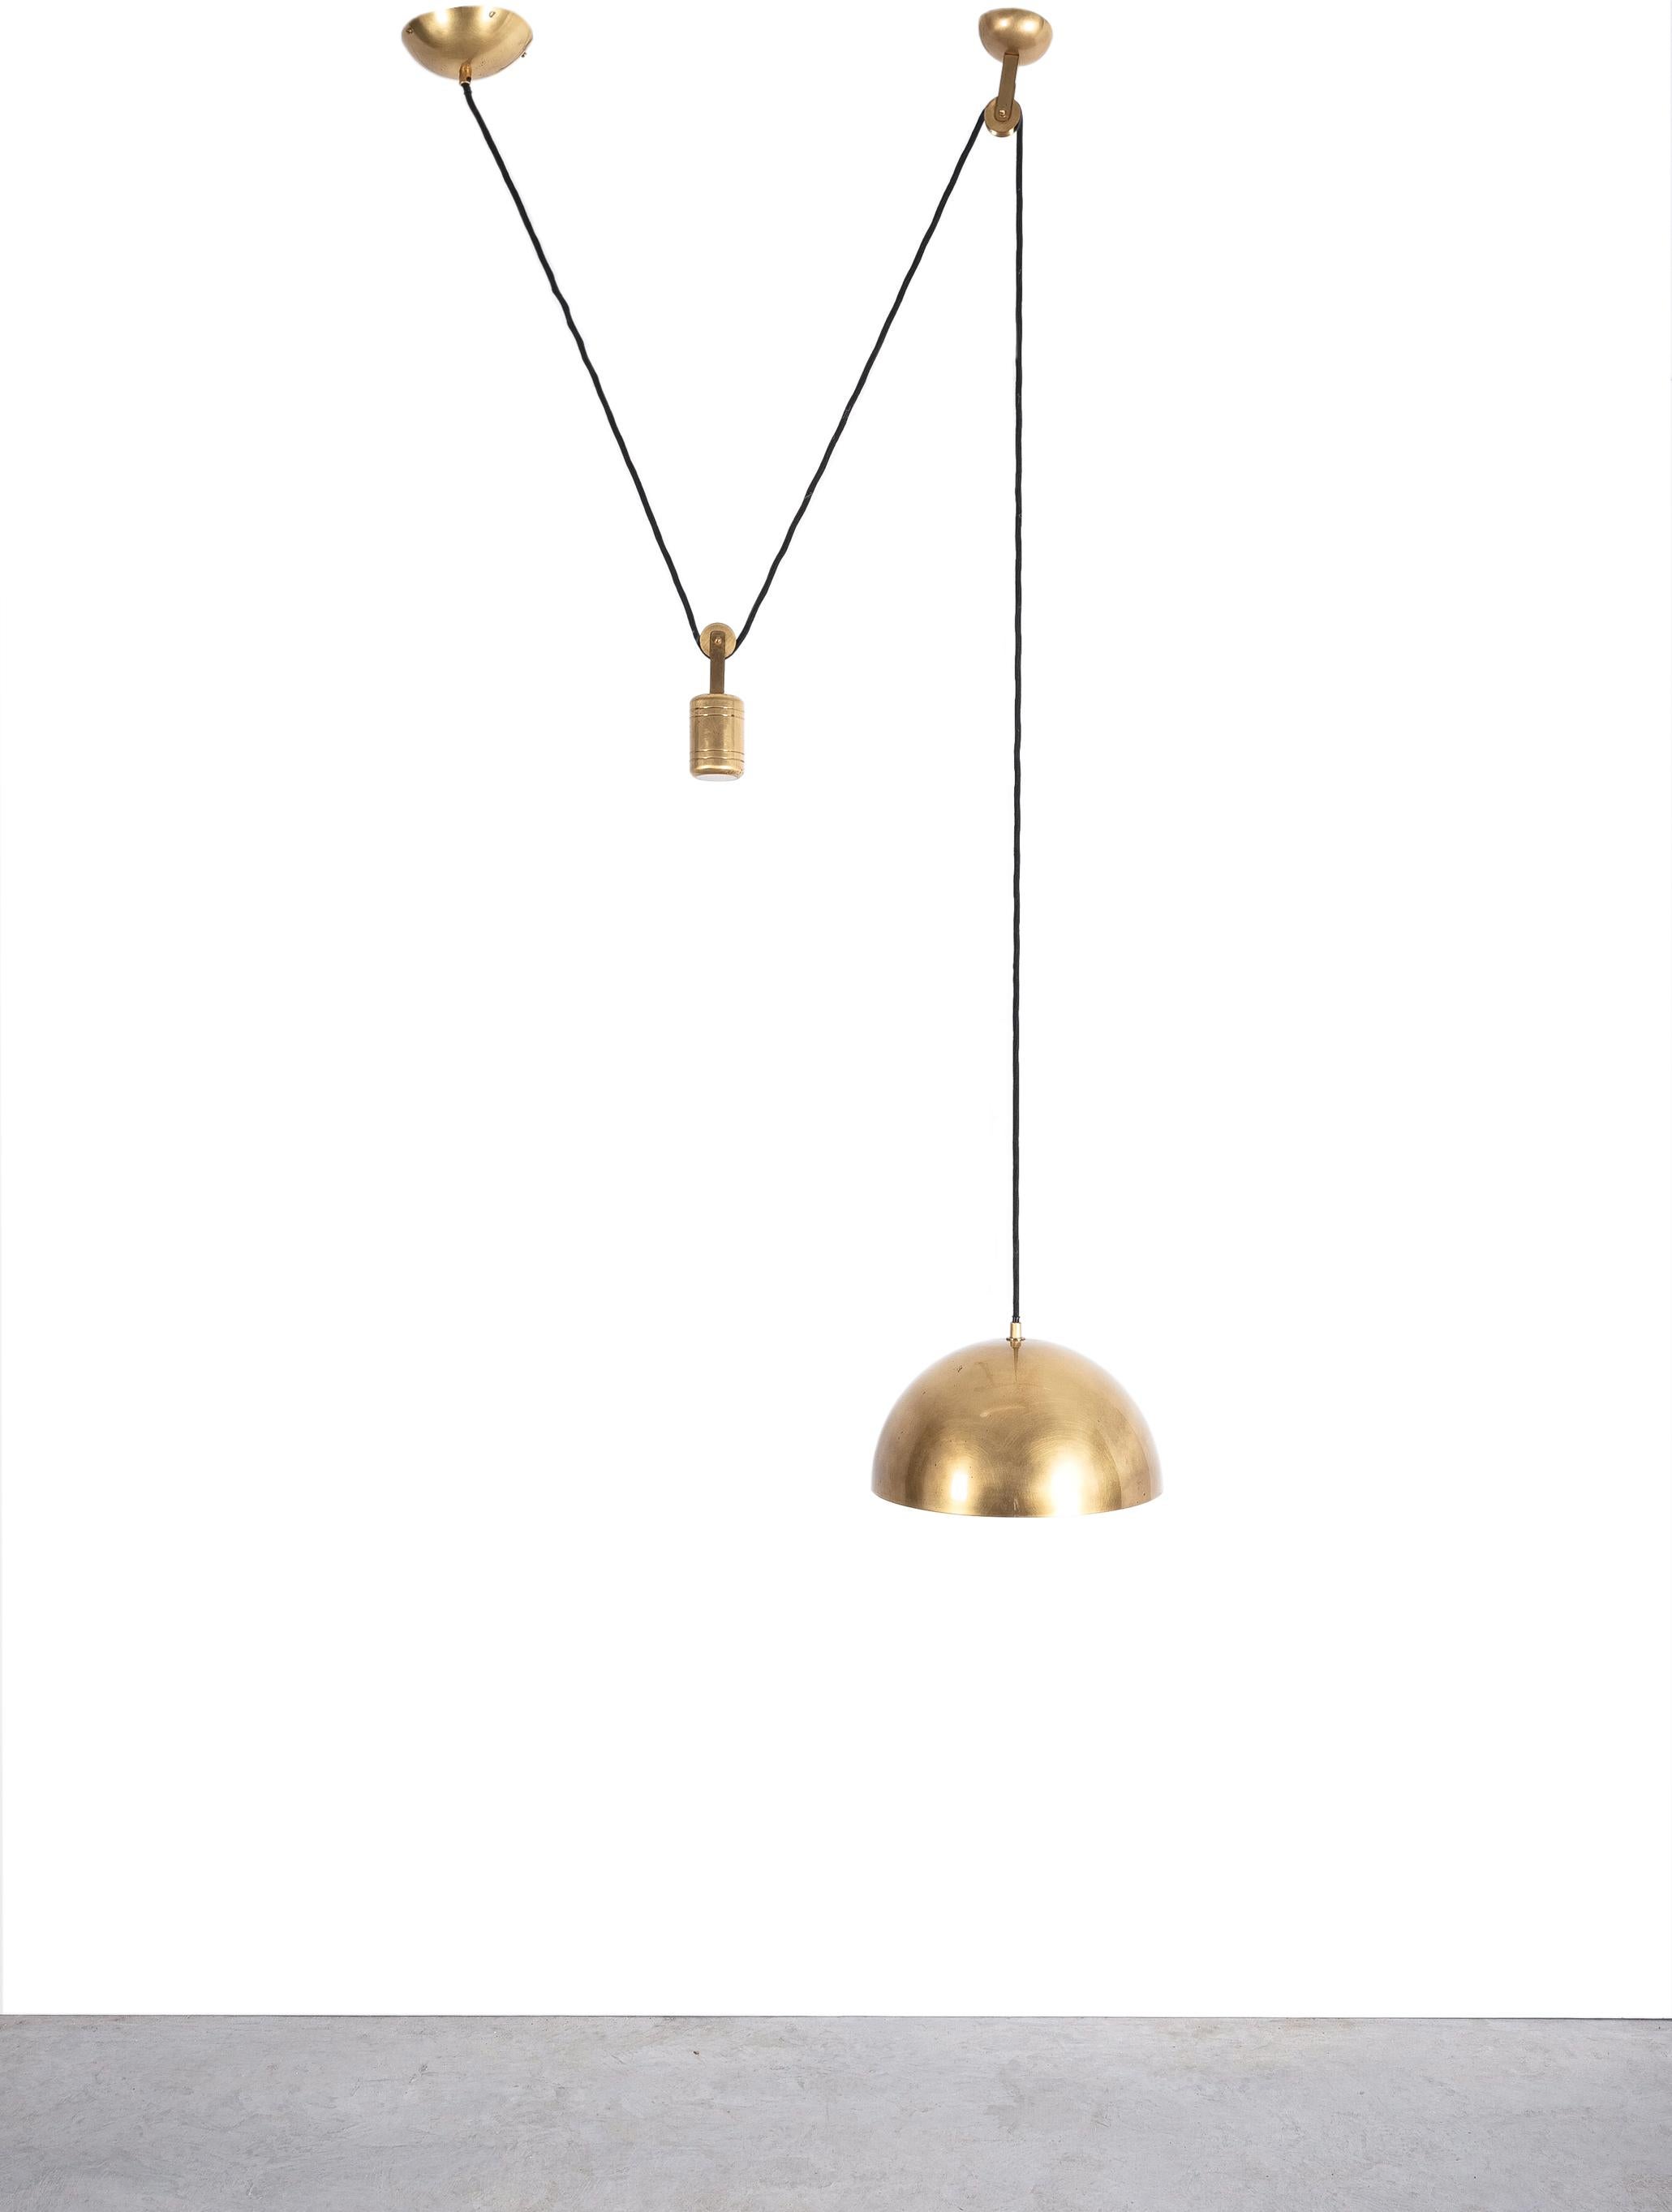 Midcentury counterbalance lamp by Florian Schulz, Germany circa 1960

Elegant burnished brass pendant light by Florian Schulz/Germany with a brass 12.6 inch shade and heavy counterweight to easily adjust the light in height. It has got an